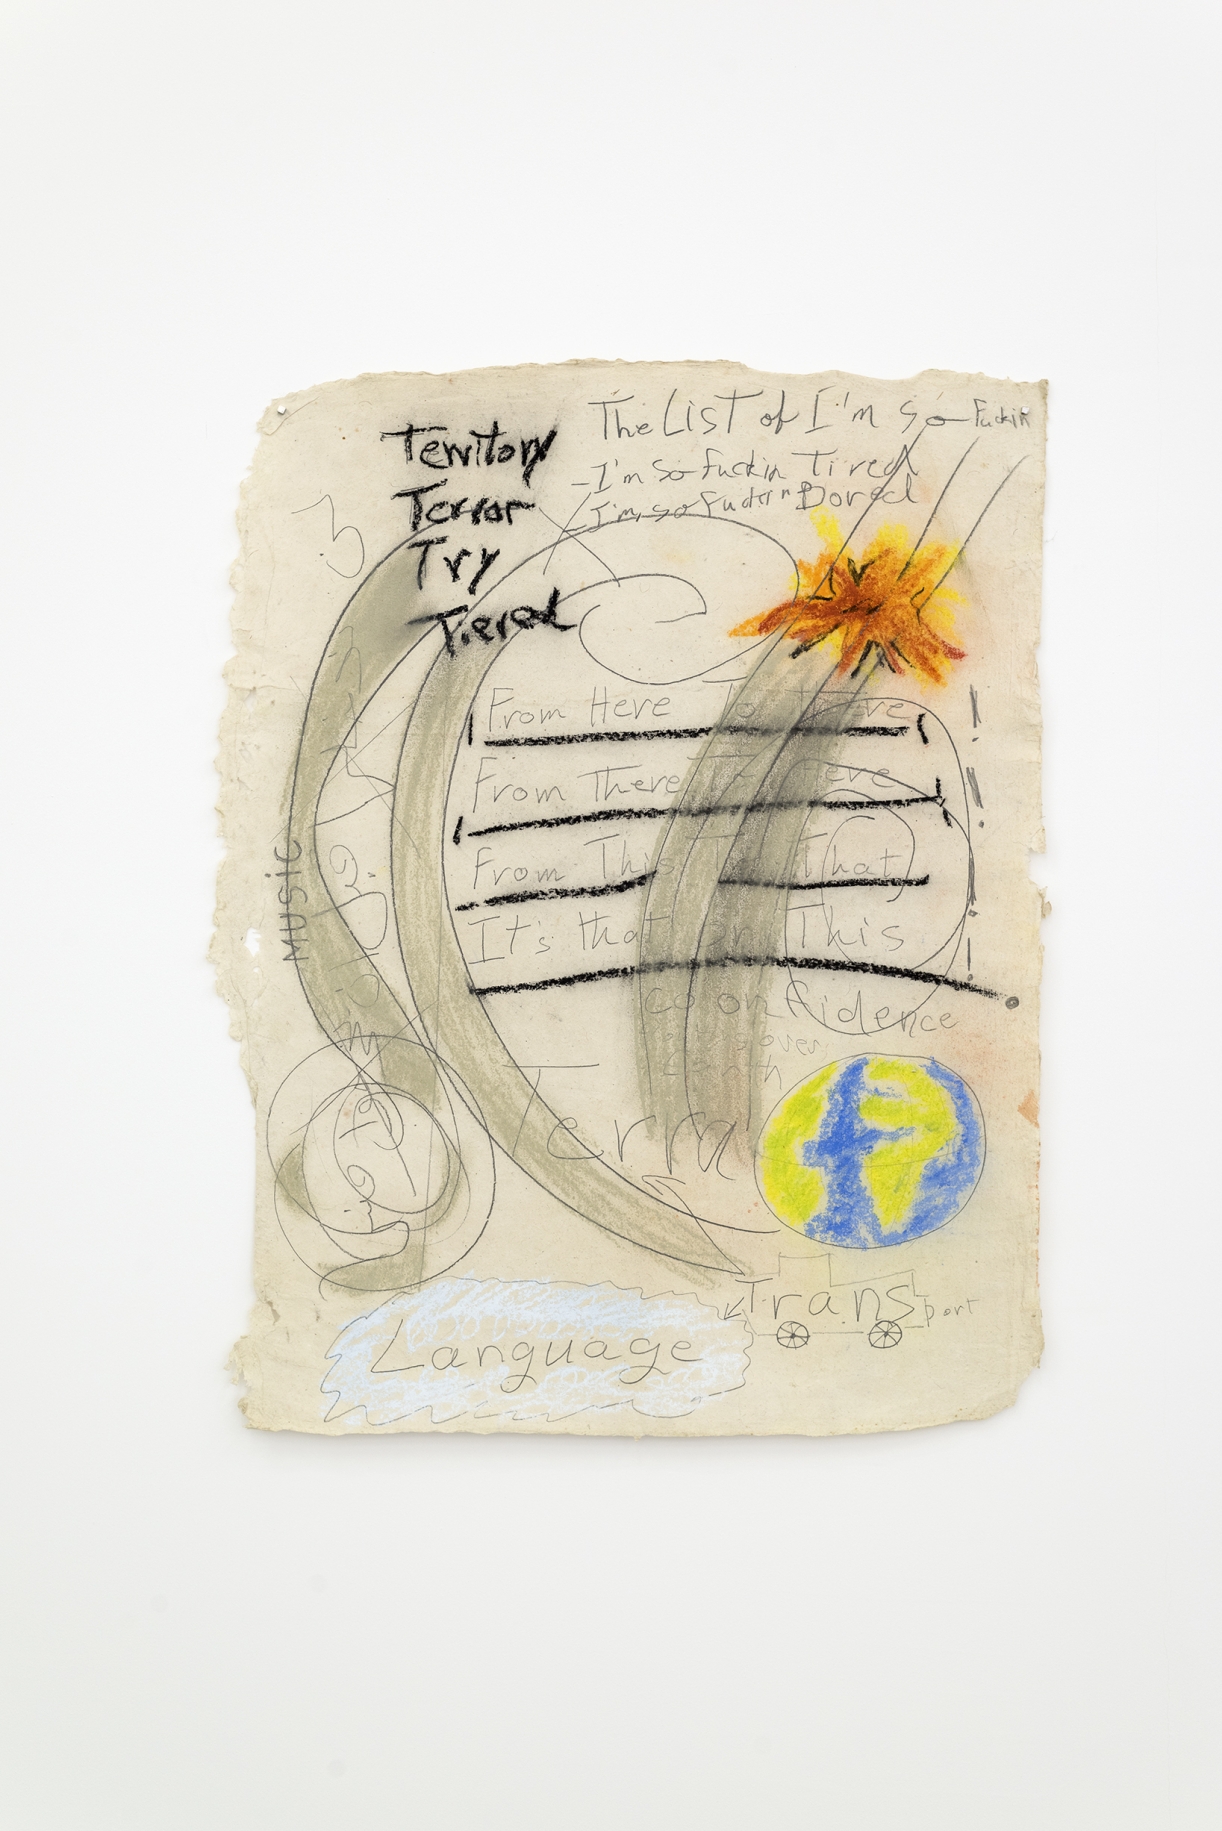 Marwan Rechmaoui, The list of I'm so fuckin, 2019, Pastel on paper, 76x60cm, Exhibition view, Sfeir-Semler Gallery Beirut, 2021